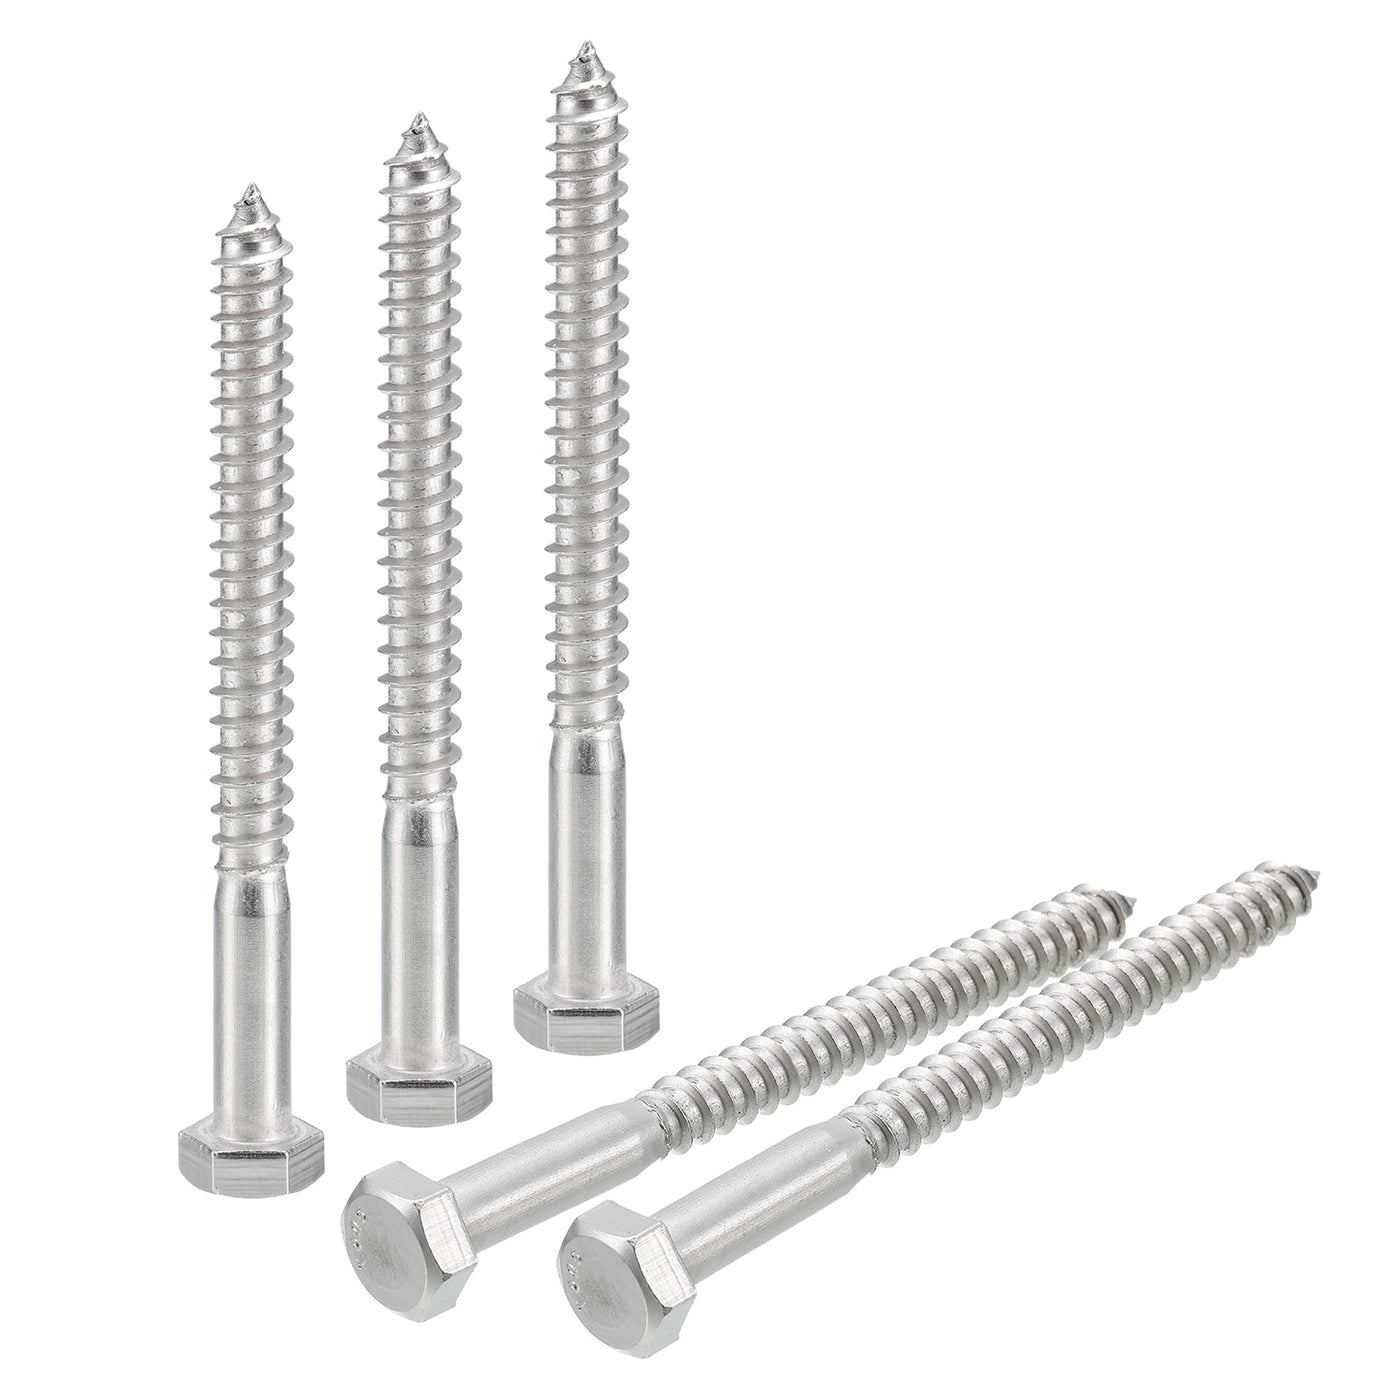 uxcell Uxcell Hex Head Lag Screws Bolts, 5pcs 5/16" x 3-1/2" 304 Stainless Steel Wood Screws